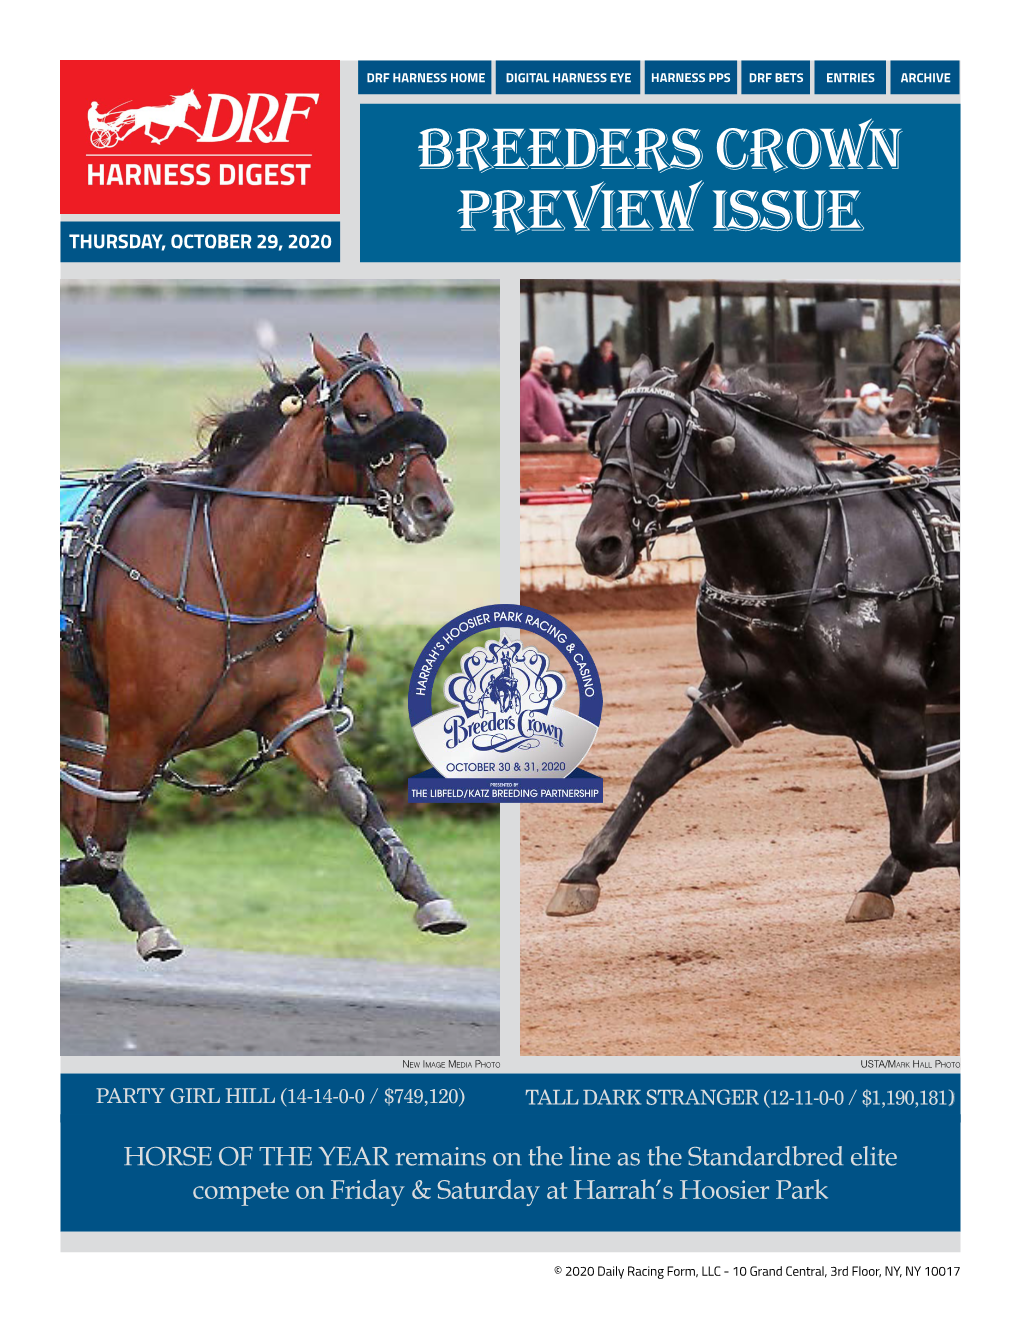 Breeders Crown Preview Issue